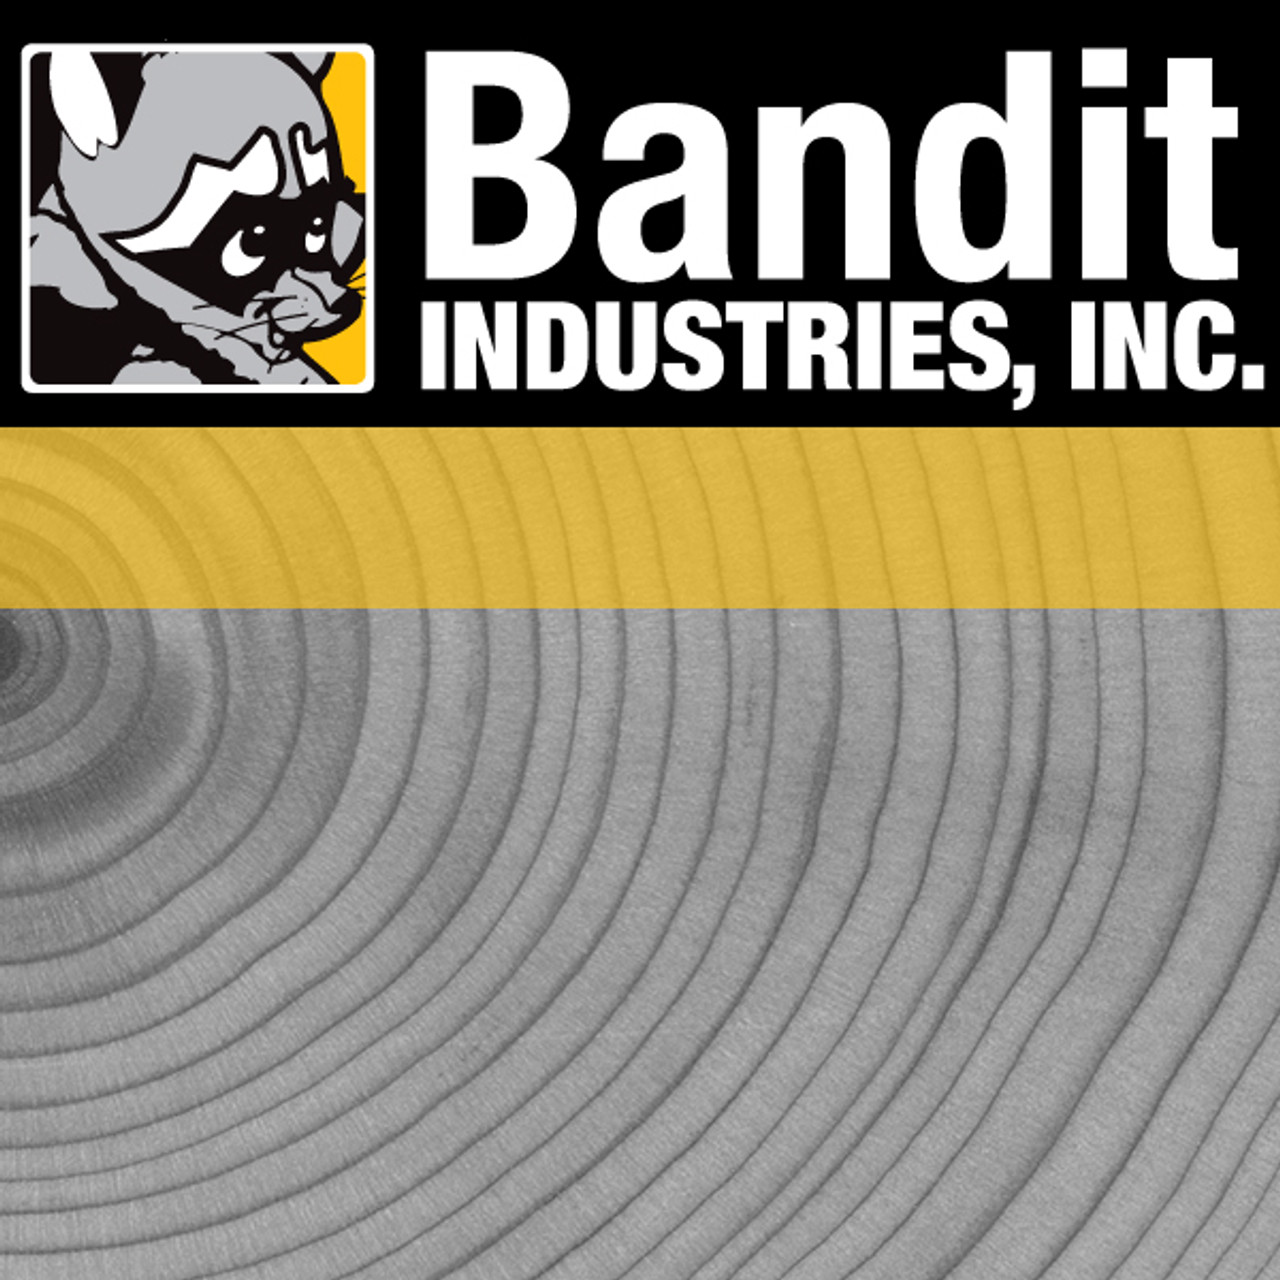 900-6950-29: BANDIT SPIDER ASSY(FAN) (8"" BLADE) FOR CAT C9 ENGINE SUCTION